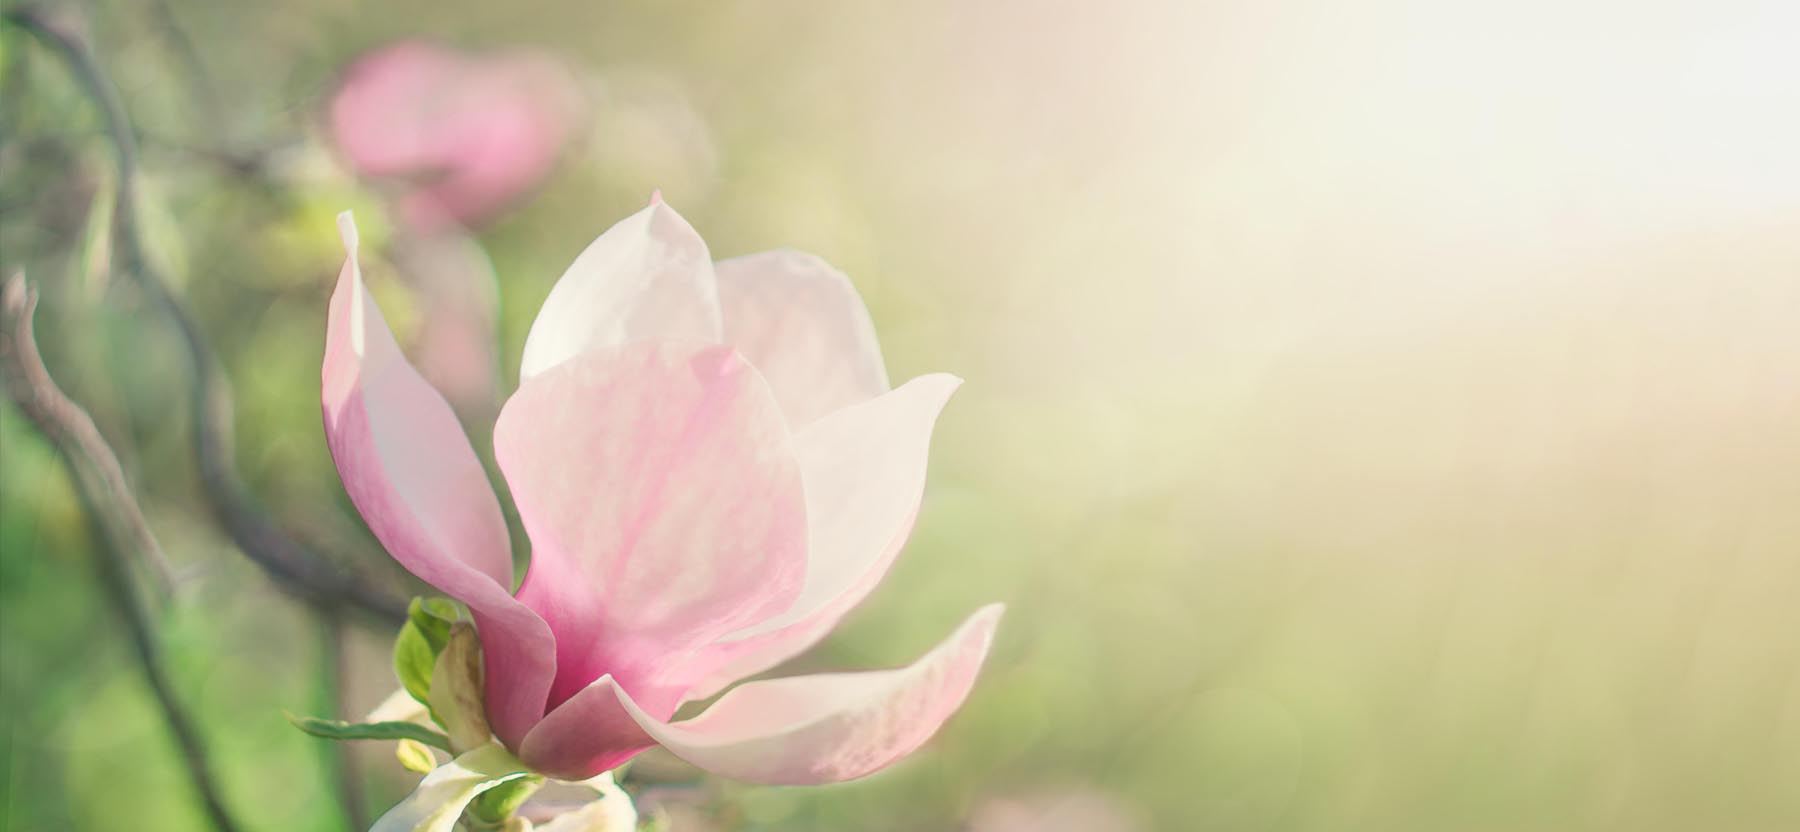 Pink Magnolia blossom on a field of out of focus greenery.